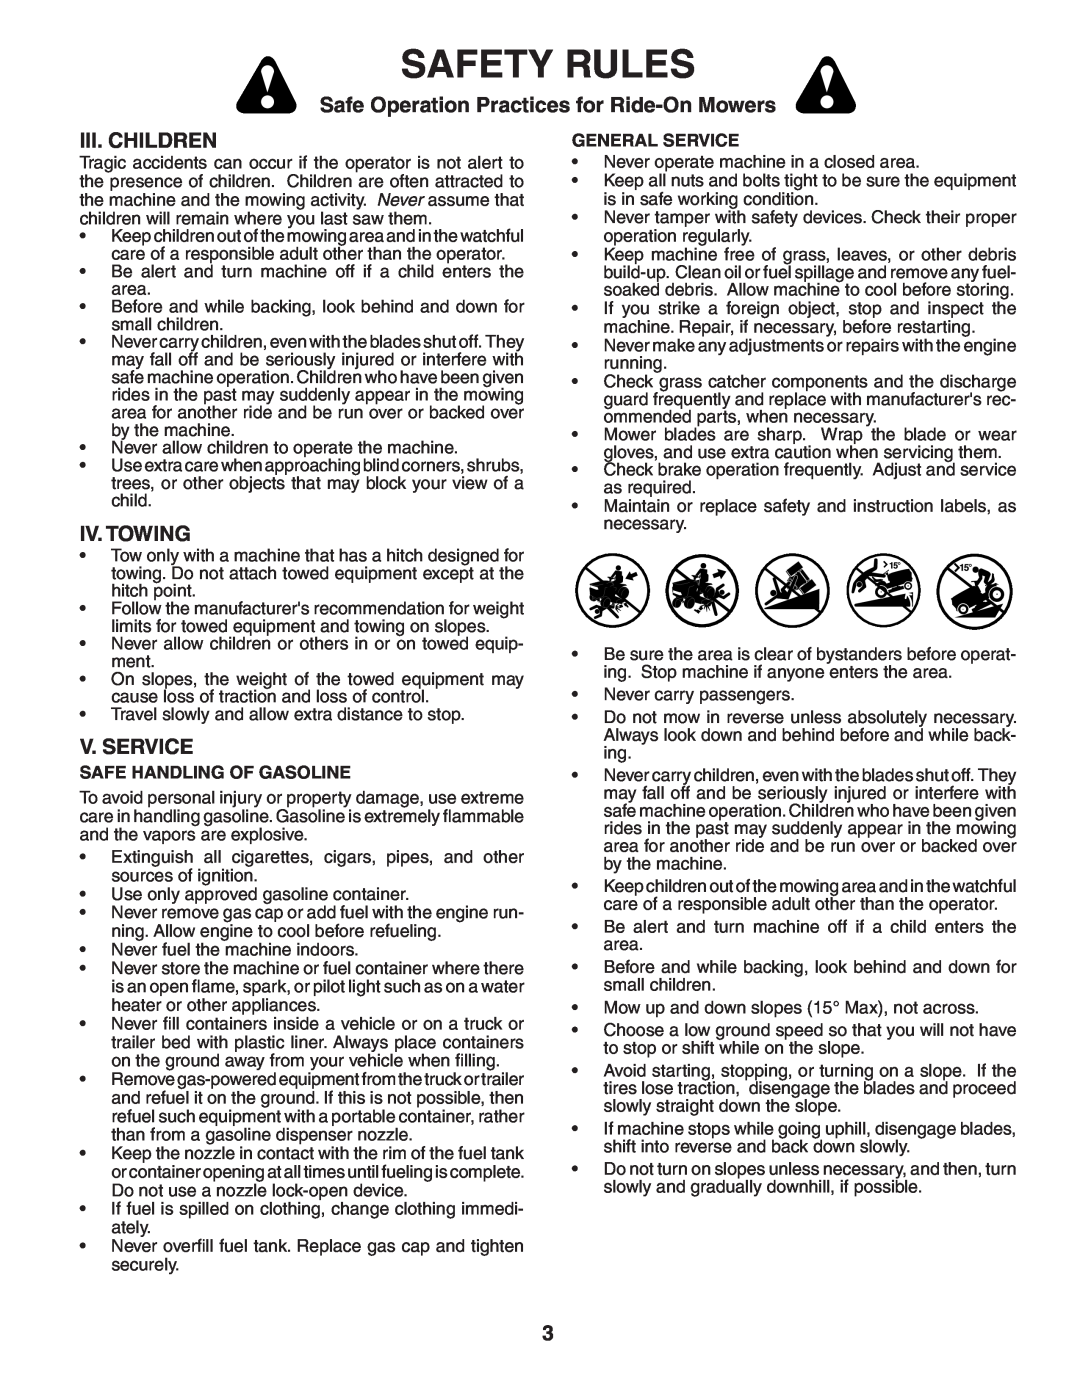 Poulan 402495 manual Iii. Children, Iv. Towing, V. Service, Safety Rules, Safe Operation Practices for Ride-On Mowers 